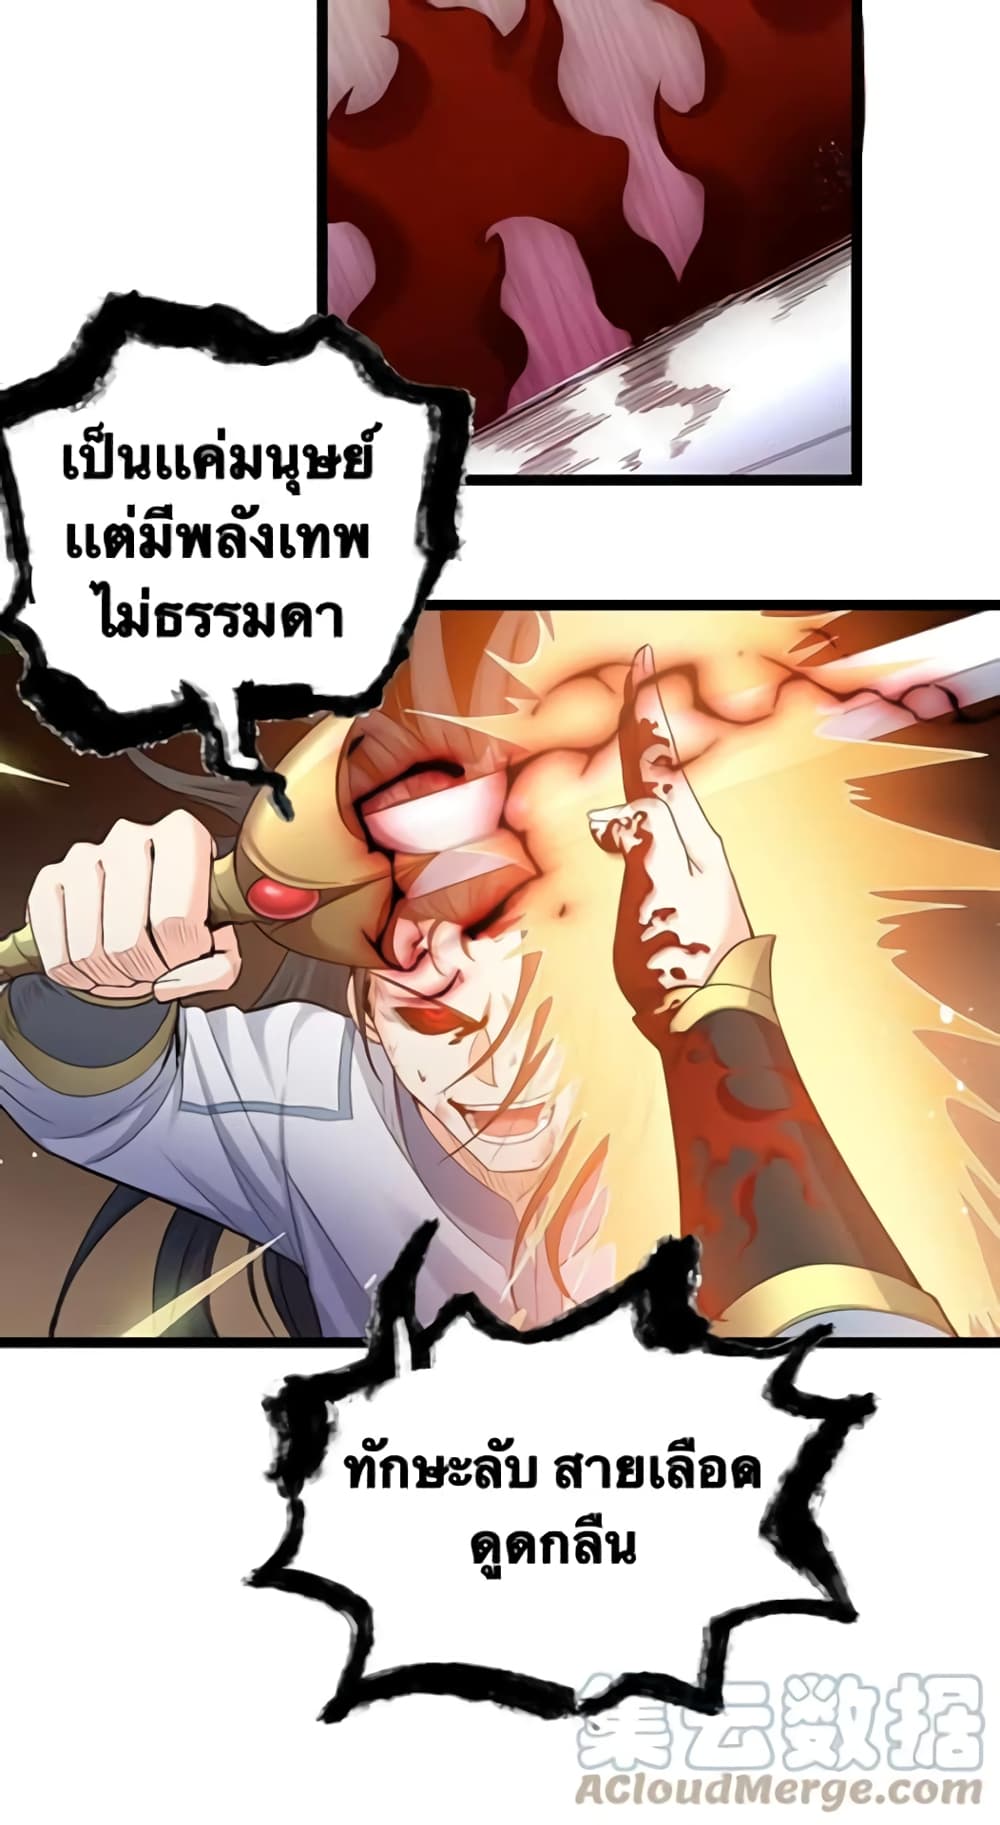 Godsian Masian from Another World ตอนที่ 89 (25)